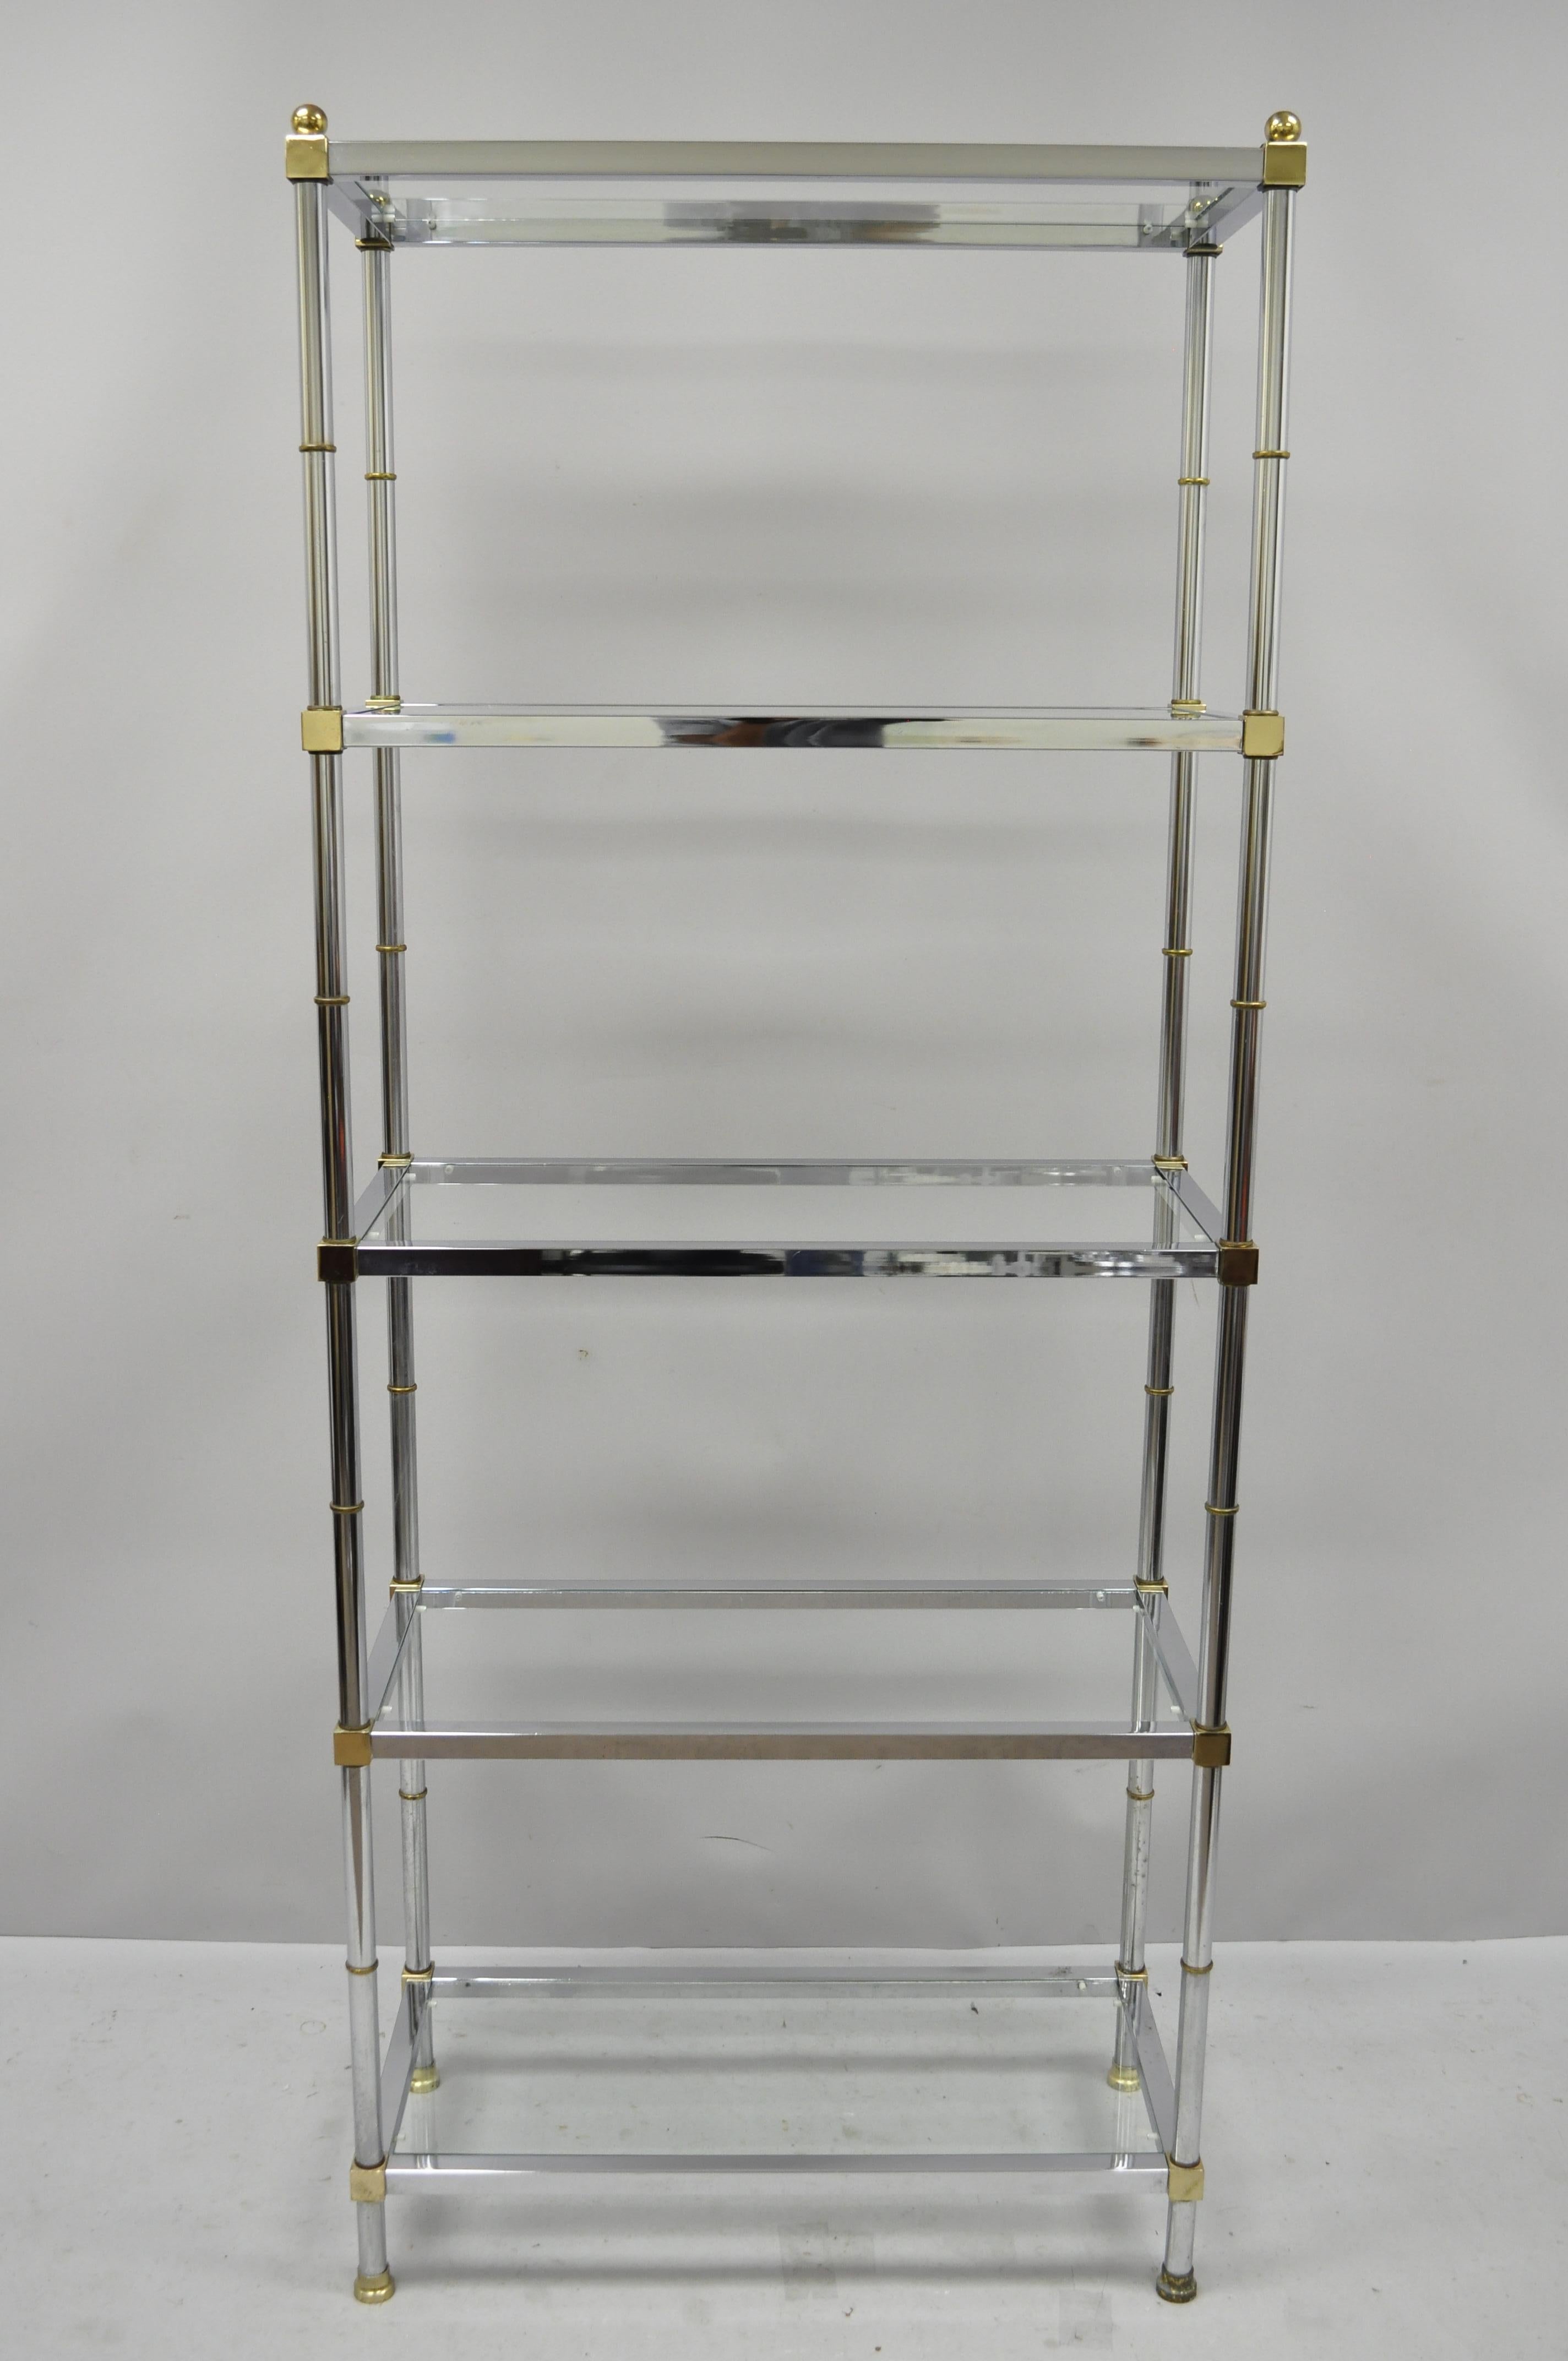 Vintage chrome brass Hollywood Regency Mid-Century Modern étagère display shelf (b). Item features brass accents, glass shelves, faux bamboo design, great style and form, circa mid-late 20th century. Measurements: 73.25